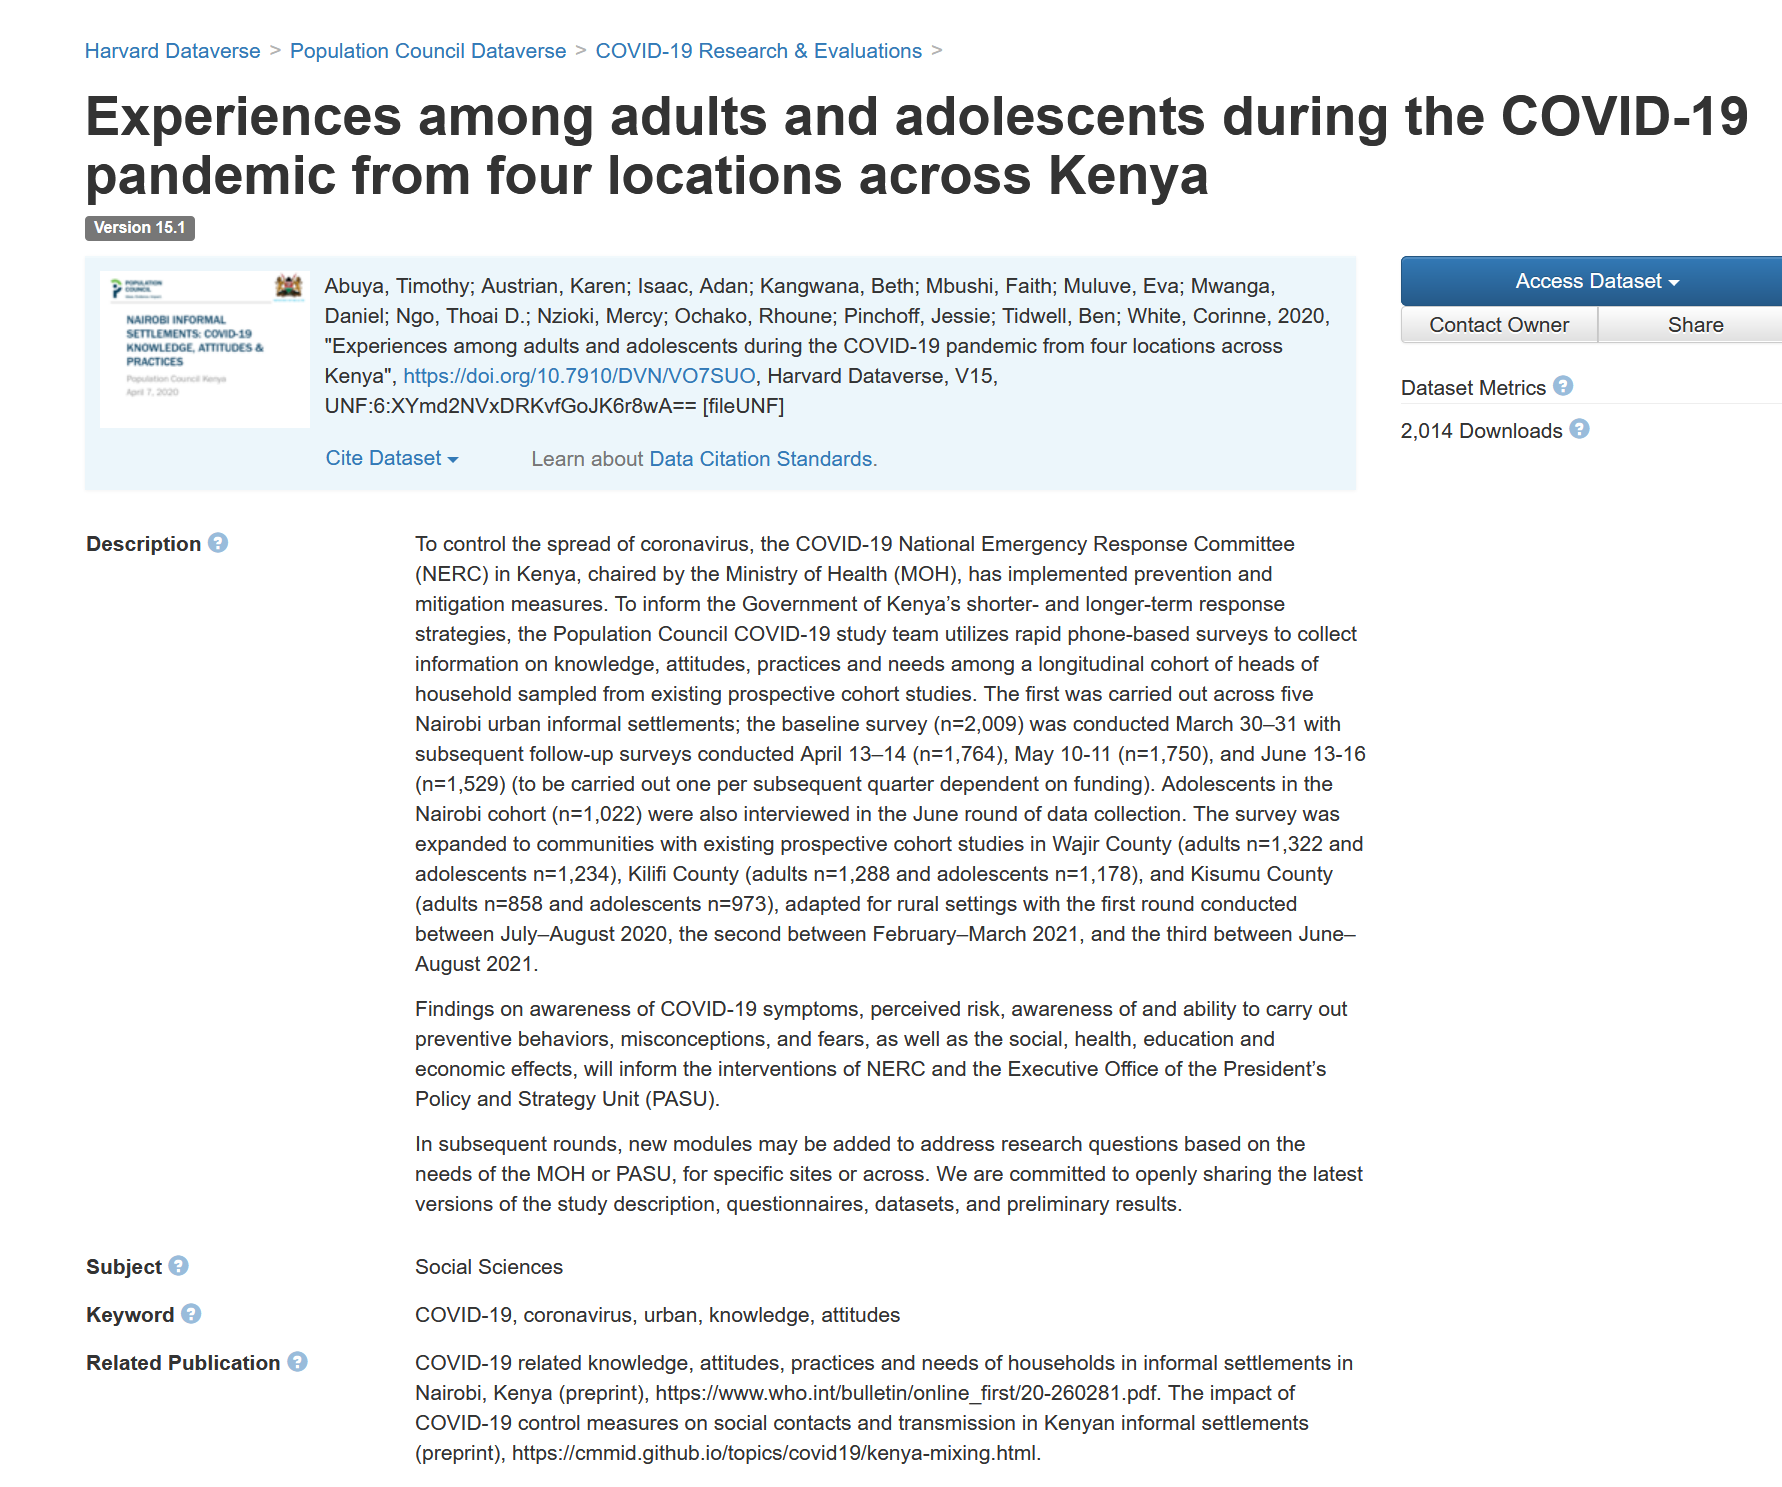 Experiences among adults and adolescents during the COVID-19 pandemic from four locations across Kenya